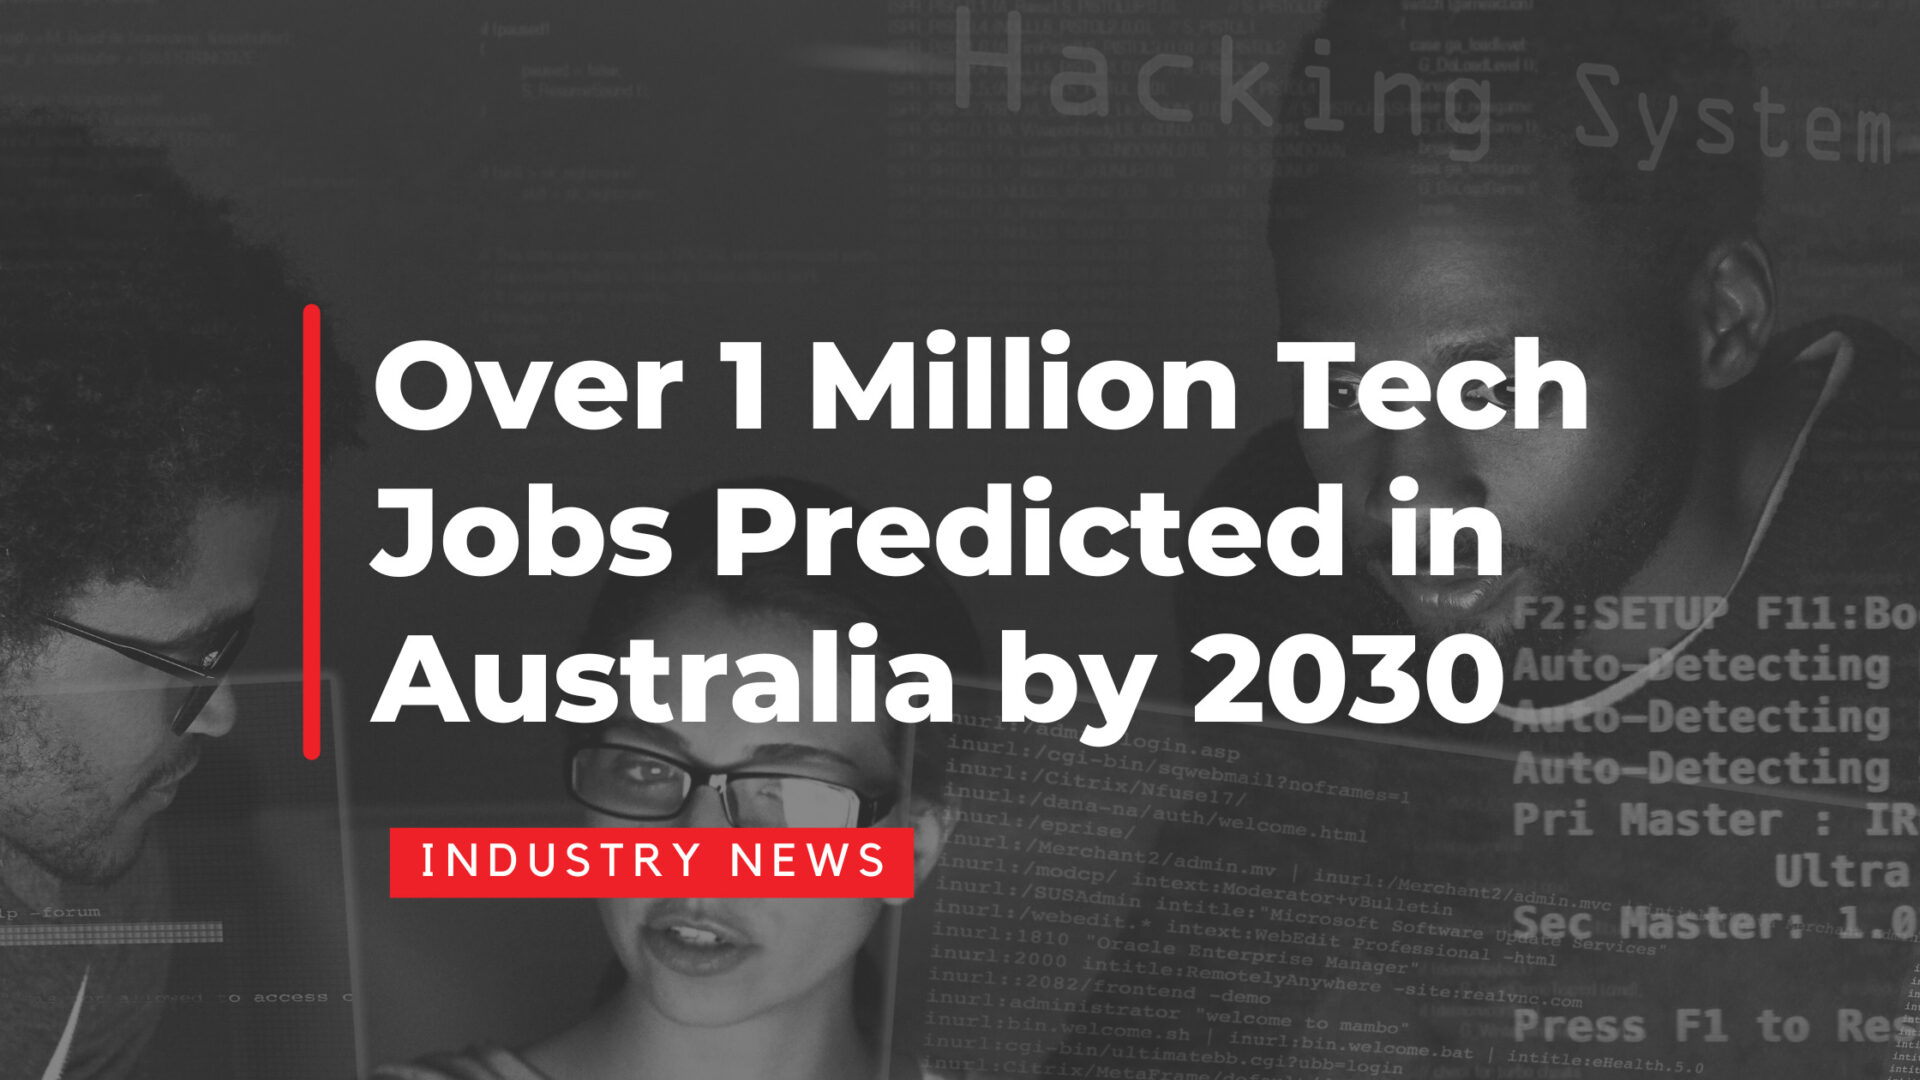 Over 1 Million Tech Jobs Predicted in Australia by 2030